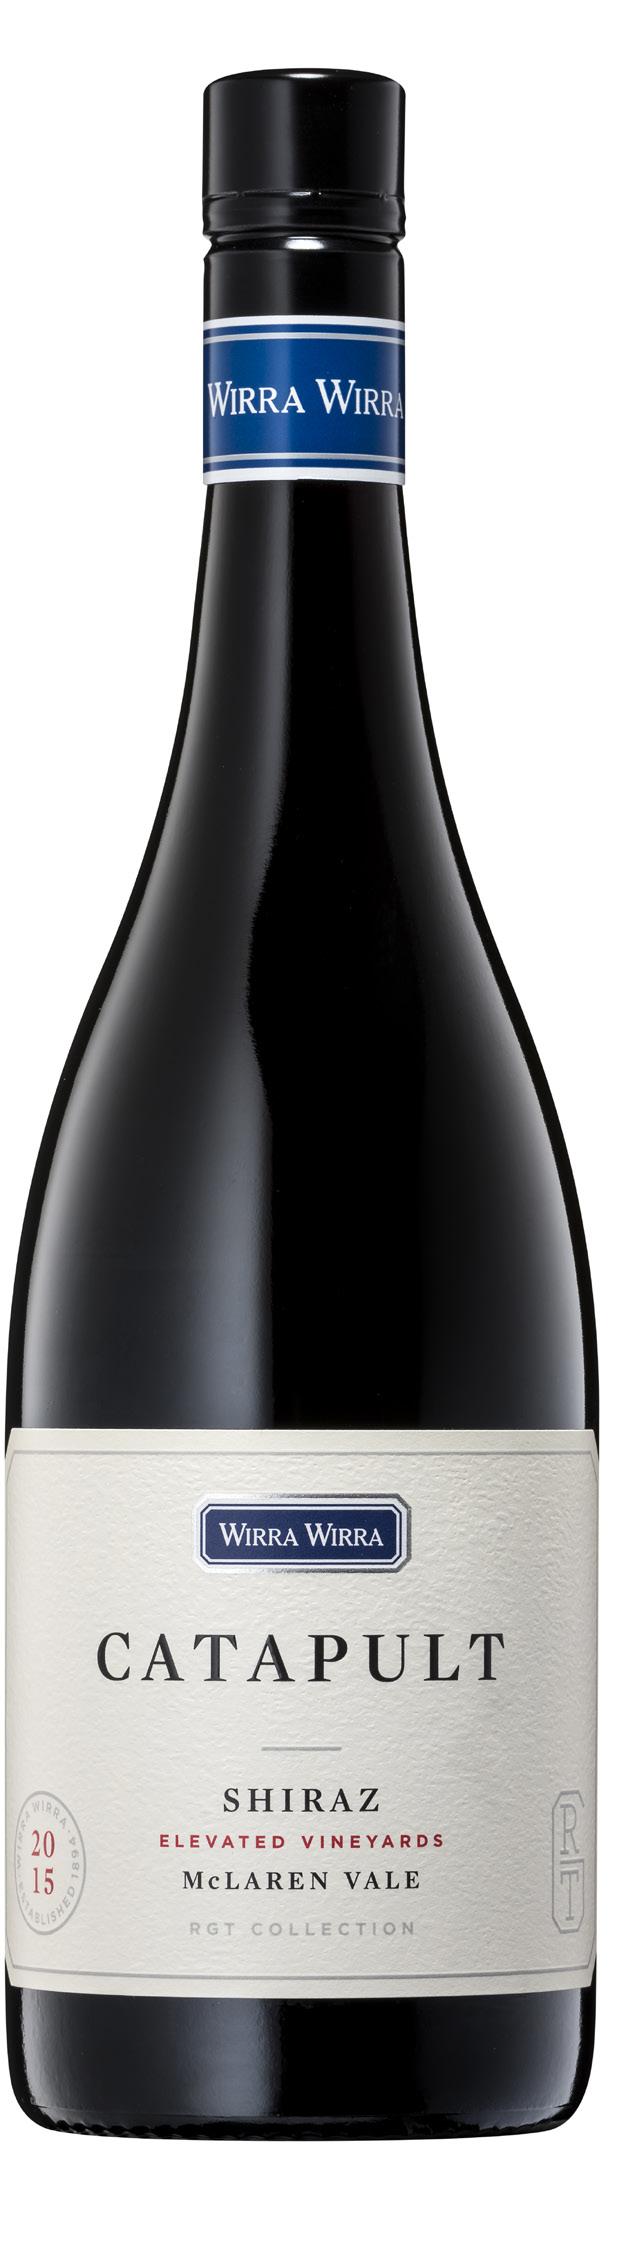 2015 Catapult The Weekend Australian, James Halliday s Top 100 - NOV 2016 95 POINTS This shiraz is from the big boys school, armed to the teeth with black fruits, bitter chocolate and tannins, lined